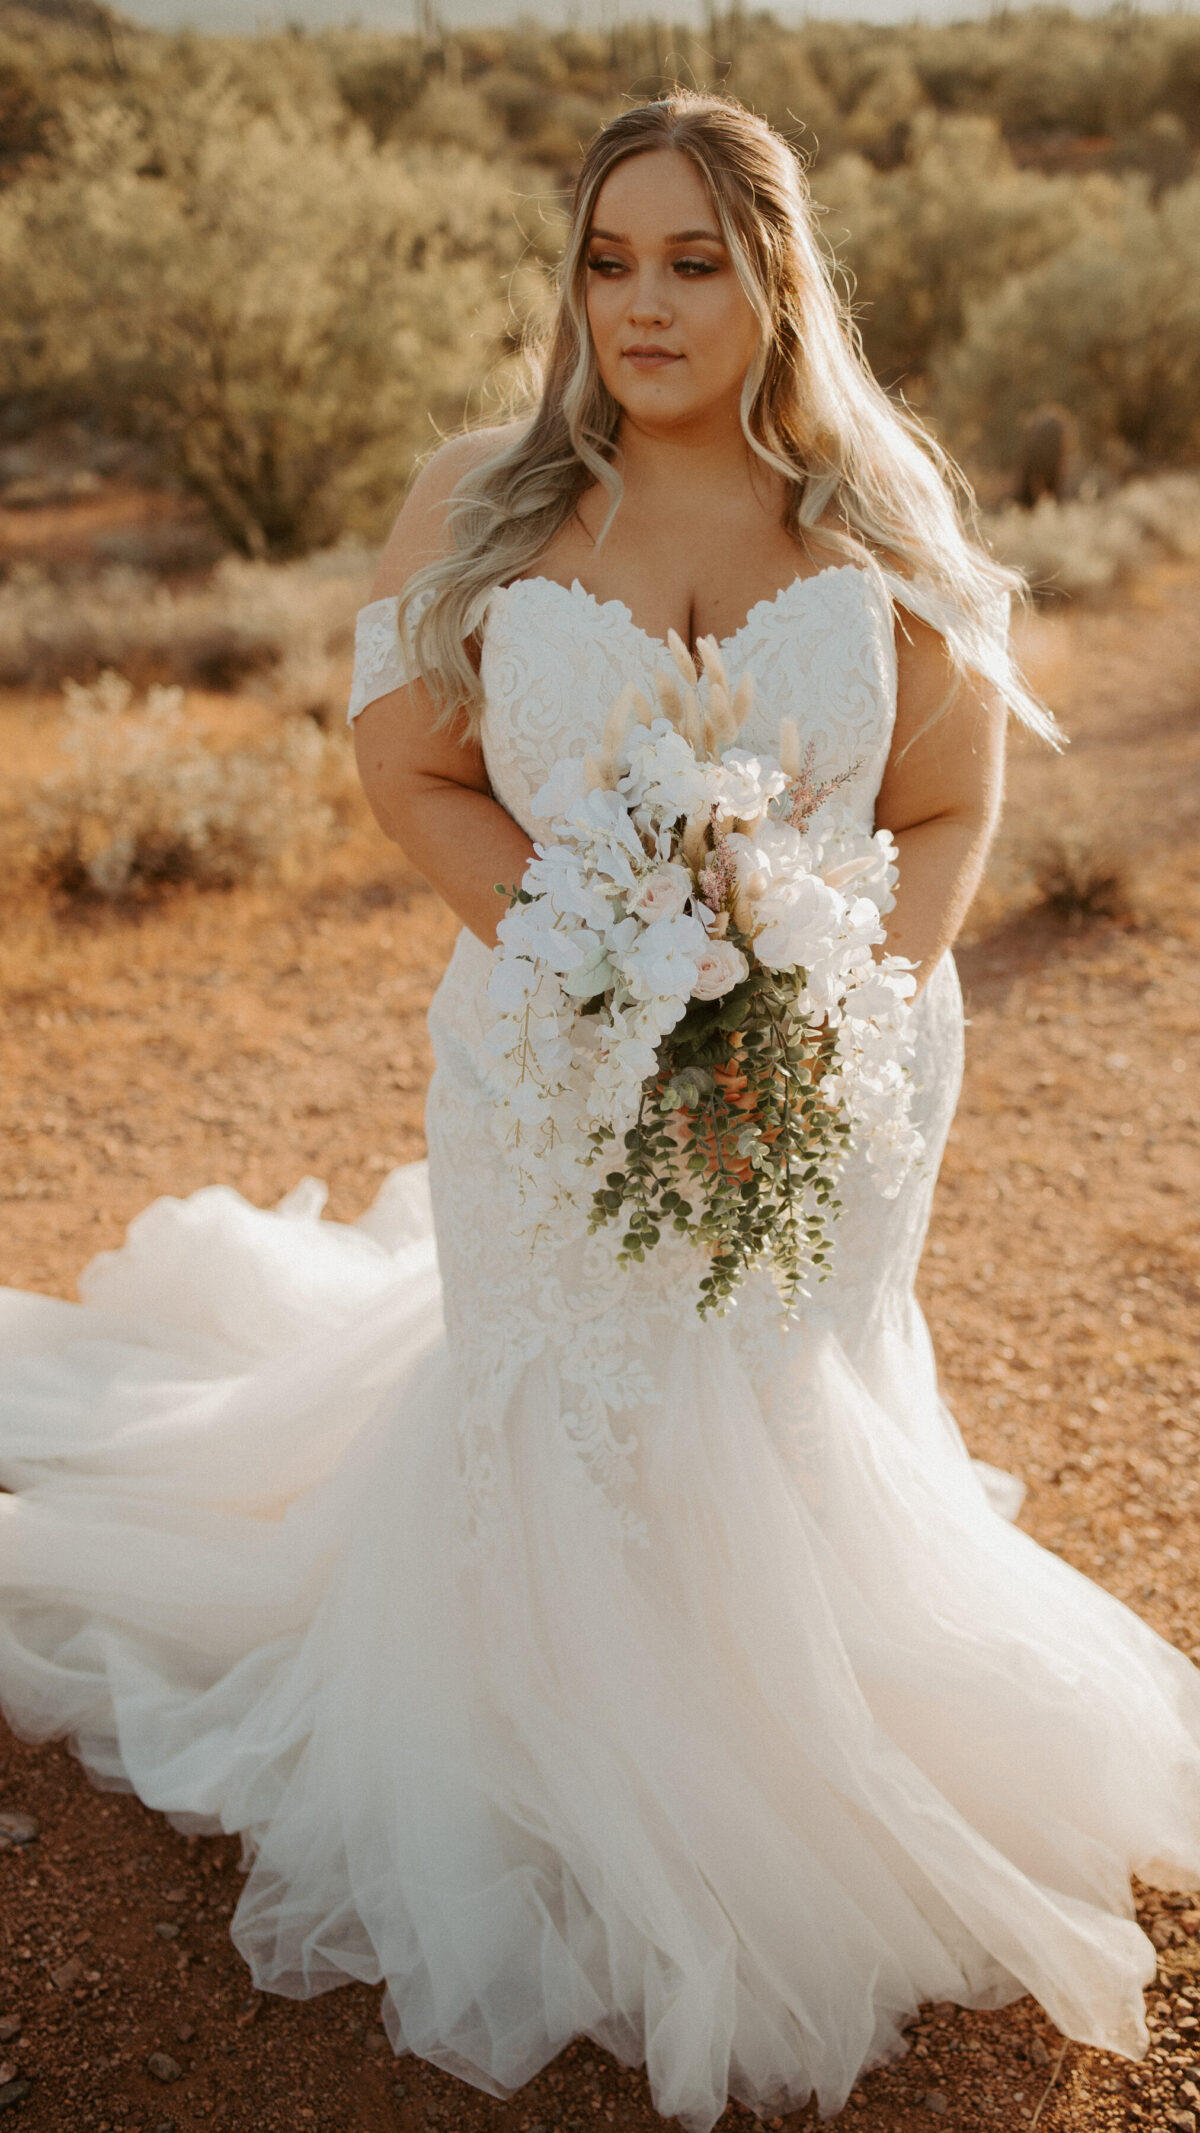 Celebrate Your Special Day with a Stella York Wedding Dress